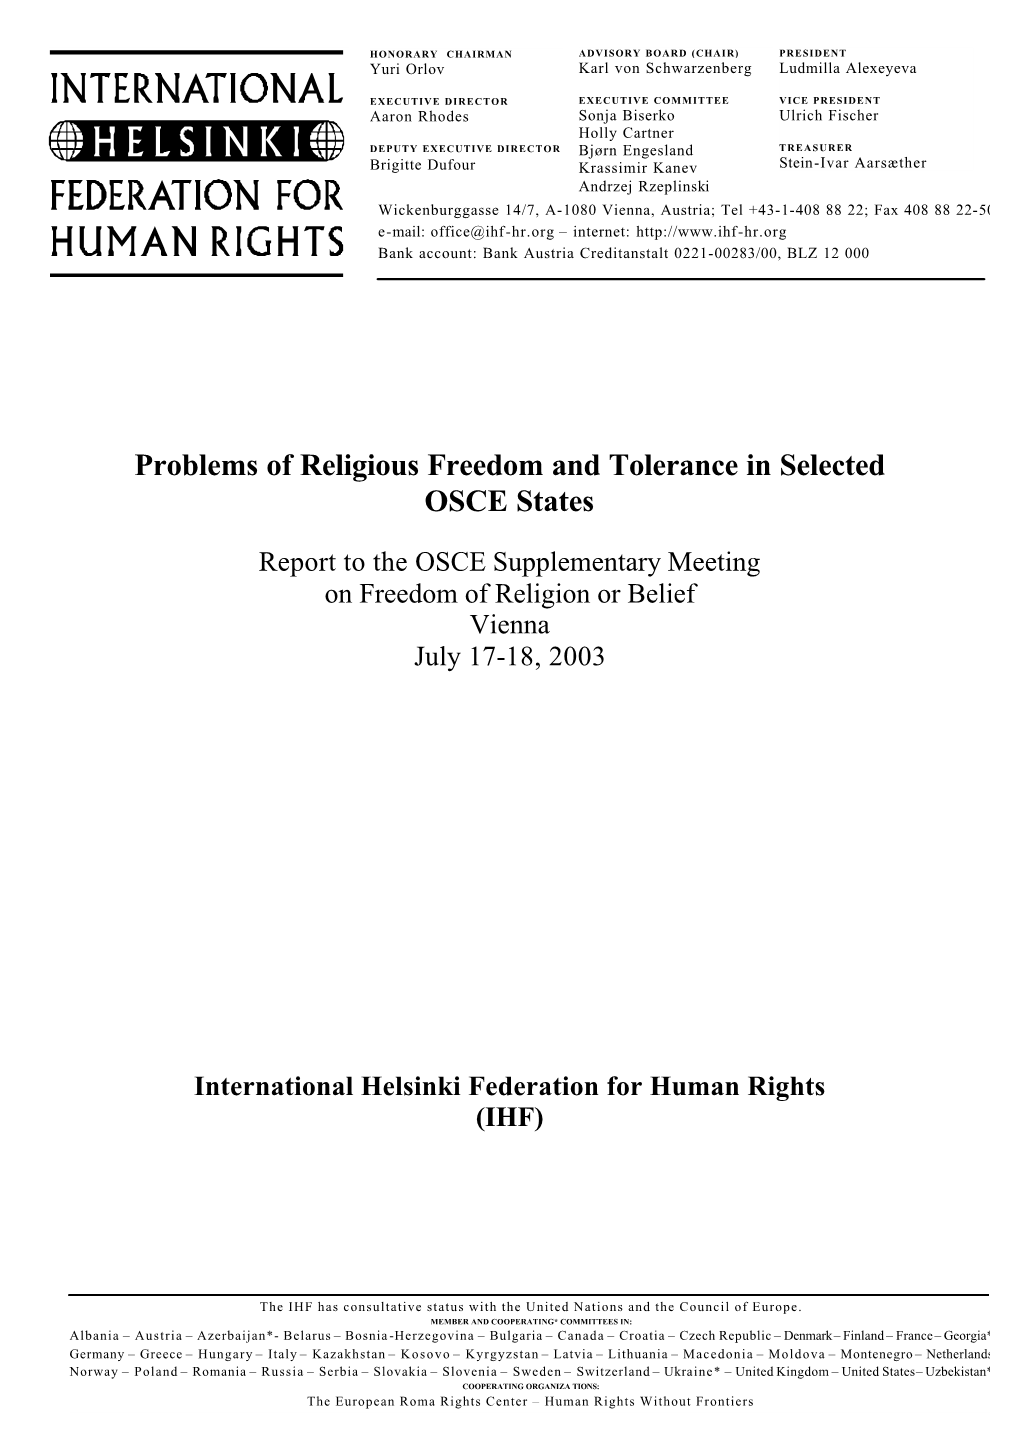 Problems of Religious Freedom and Tolerance in Selected OSCE States